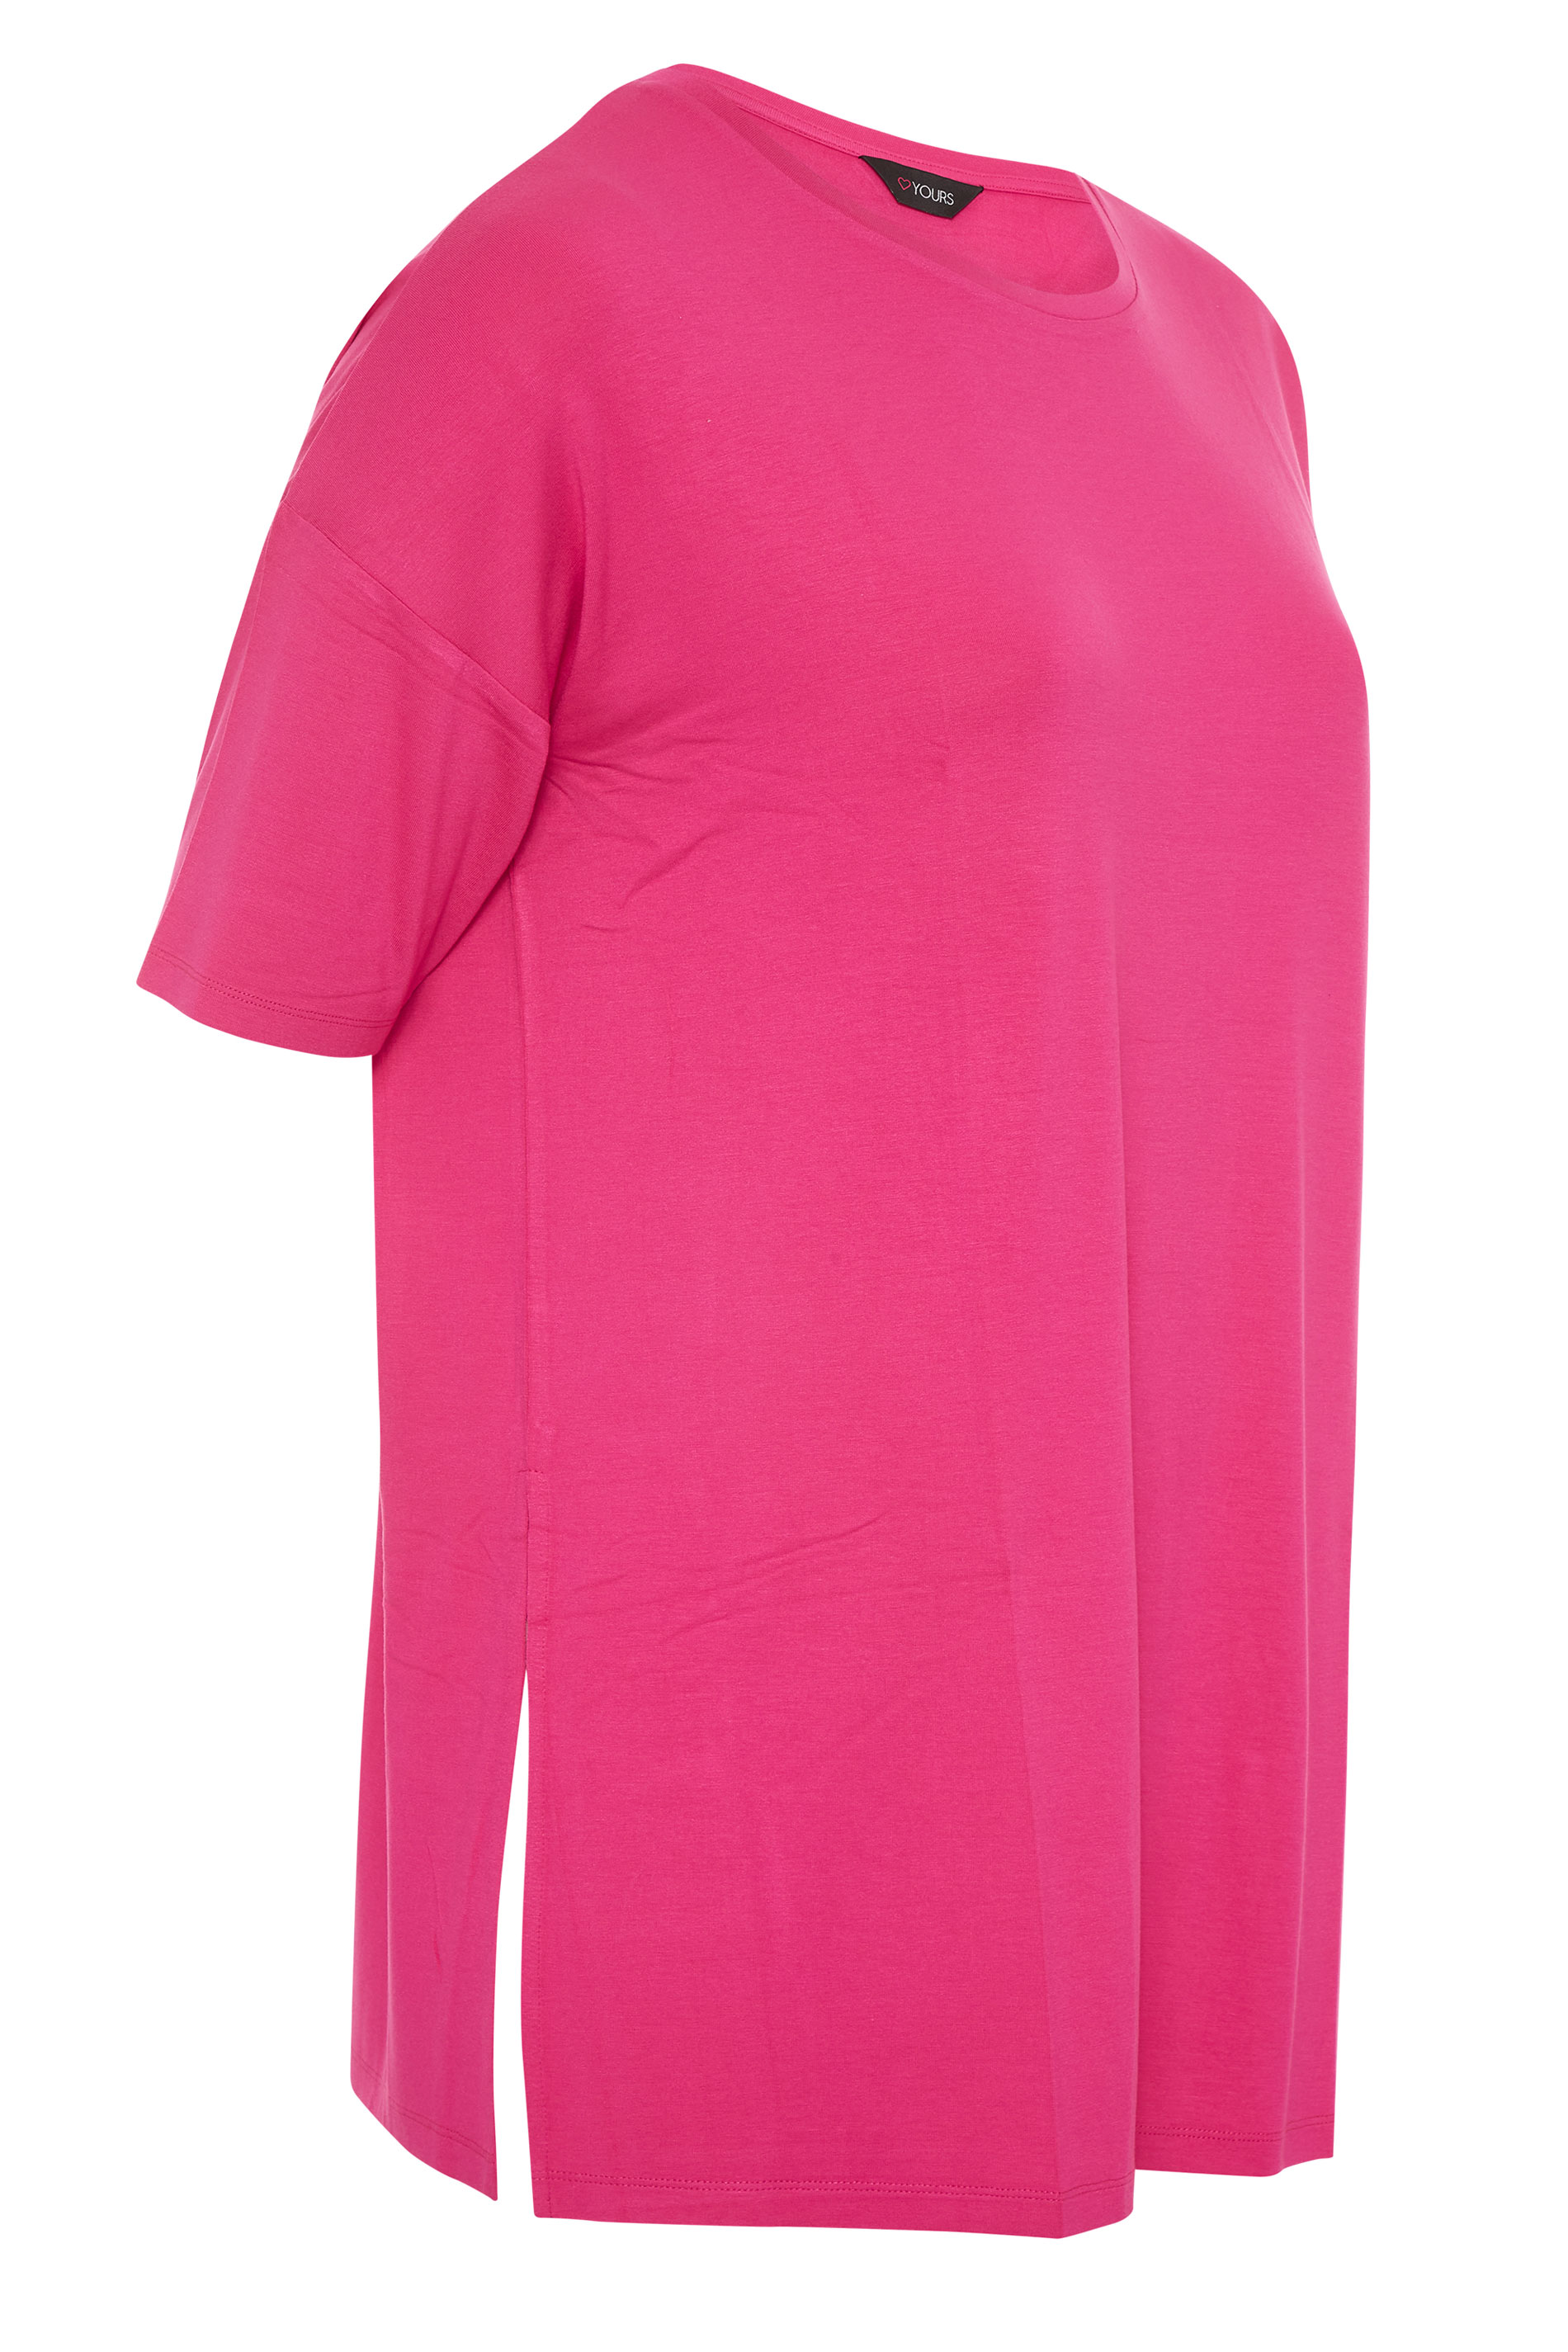 Hot Pink Oversized T-Shirt | Yours Clothing